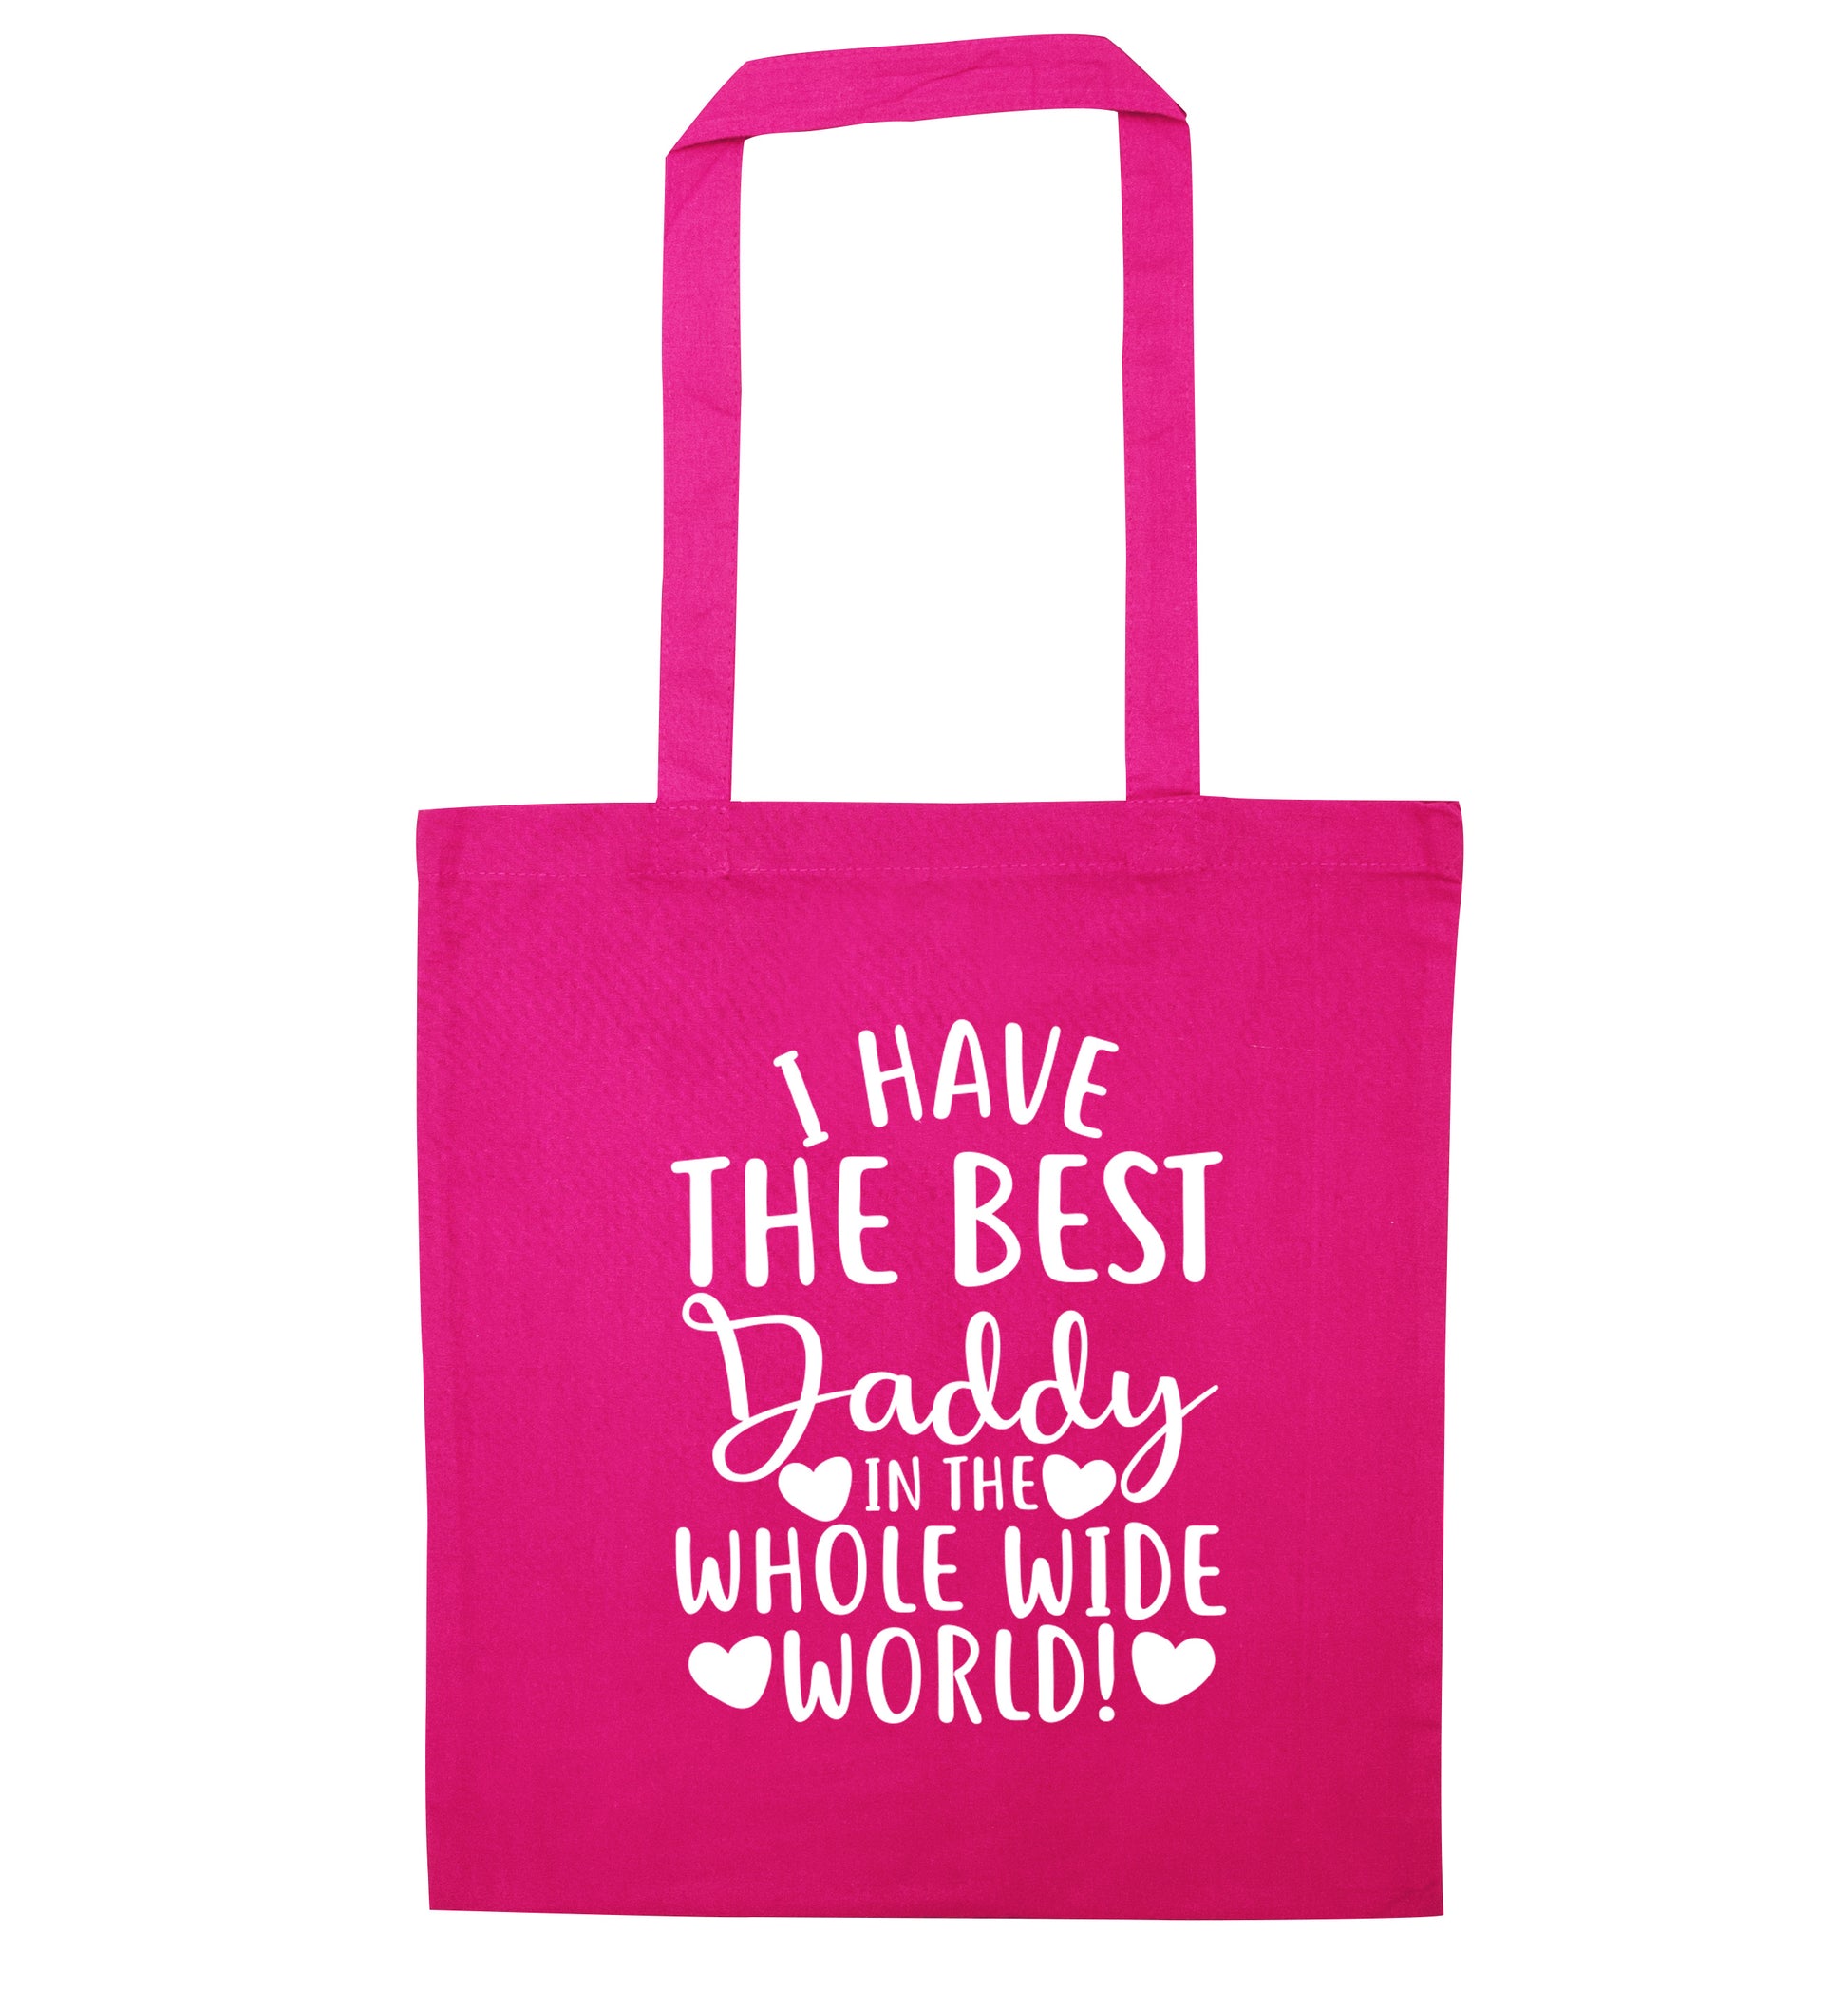 I have the best daddy in the whole wide world pink tote bag